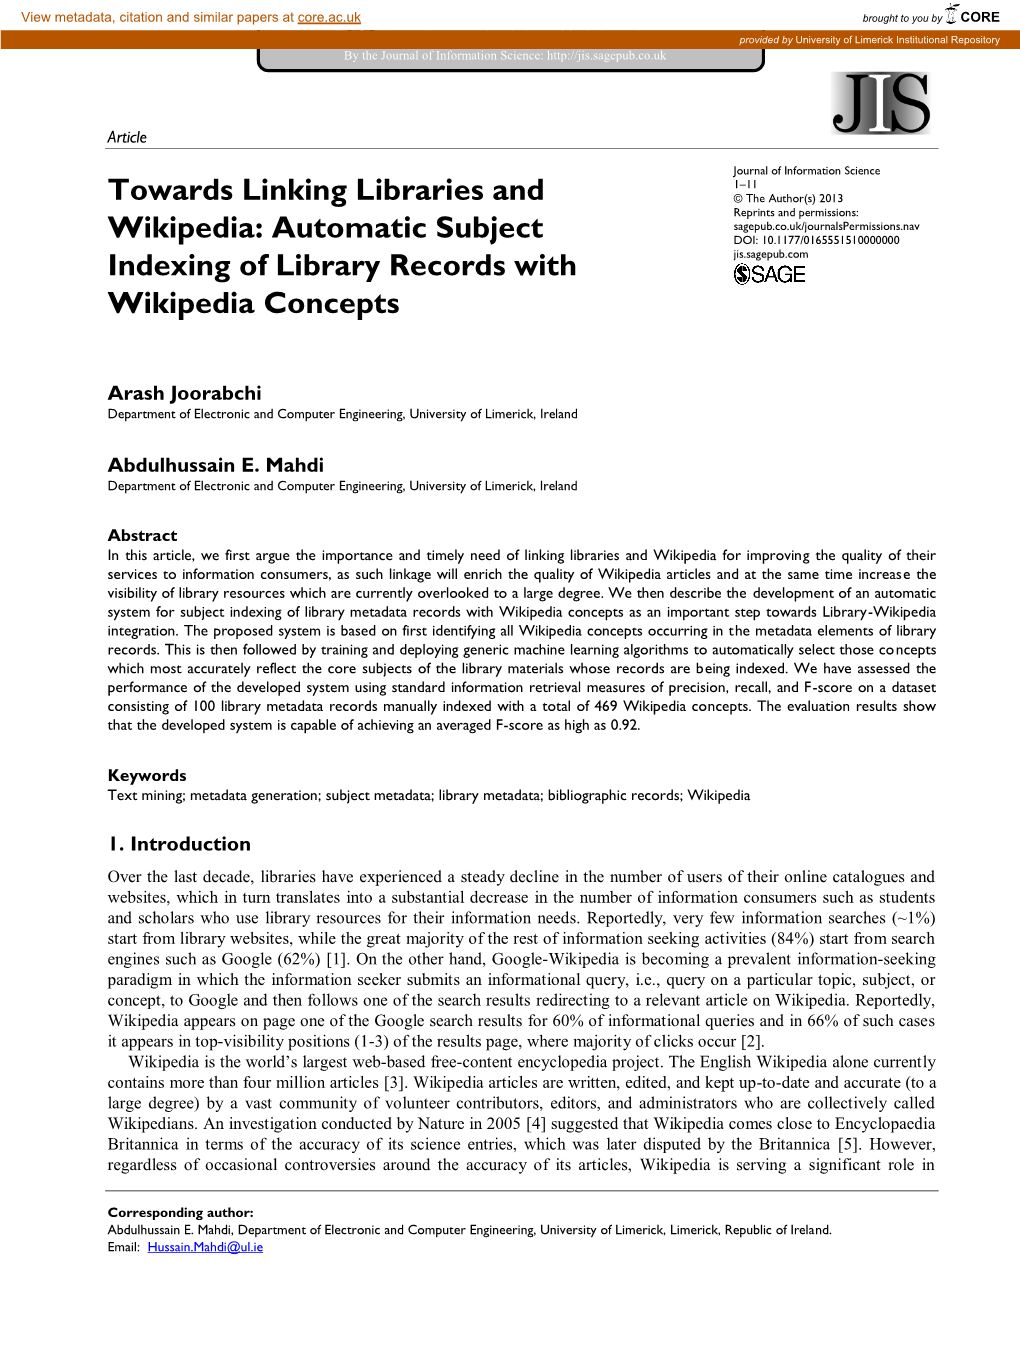 Automatic Subject Indexing of Library Records with Wikipedia Concepts